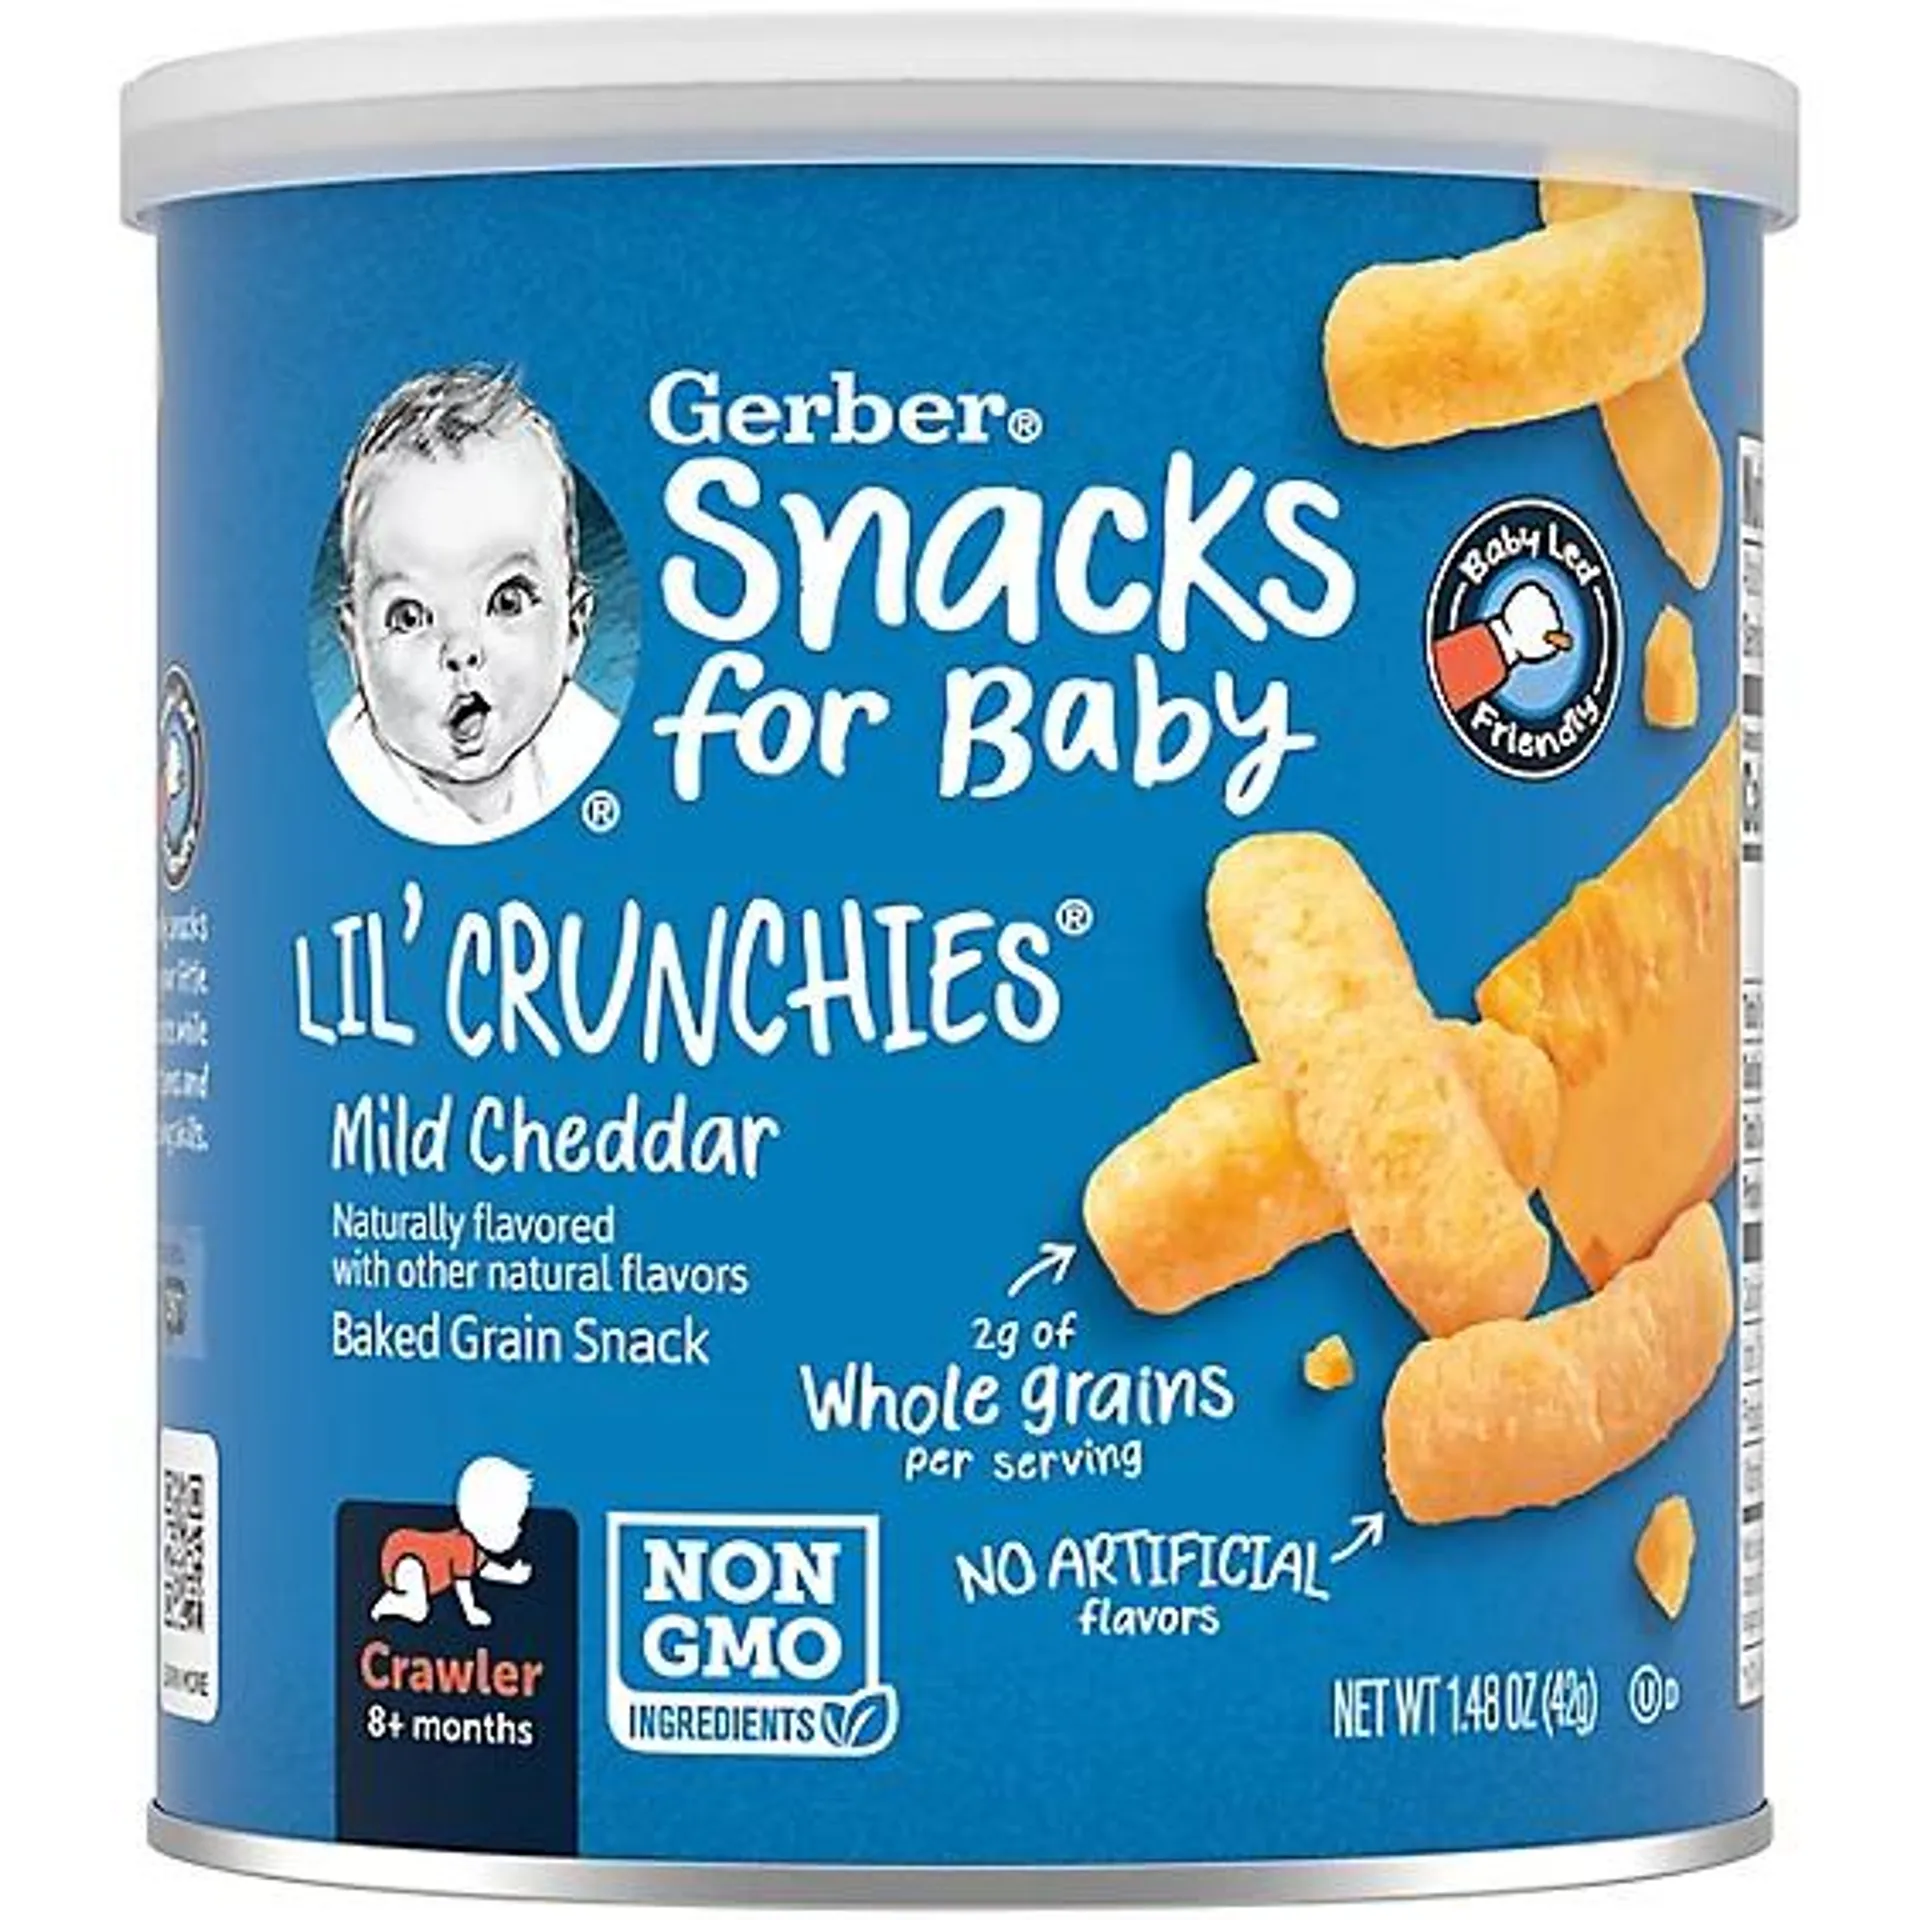 Gerber Lil Crunchies Mild Cheddar Baked Corn Snack Canister for Baby - 1.48 Oz